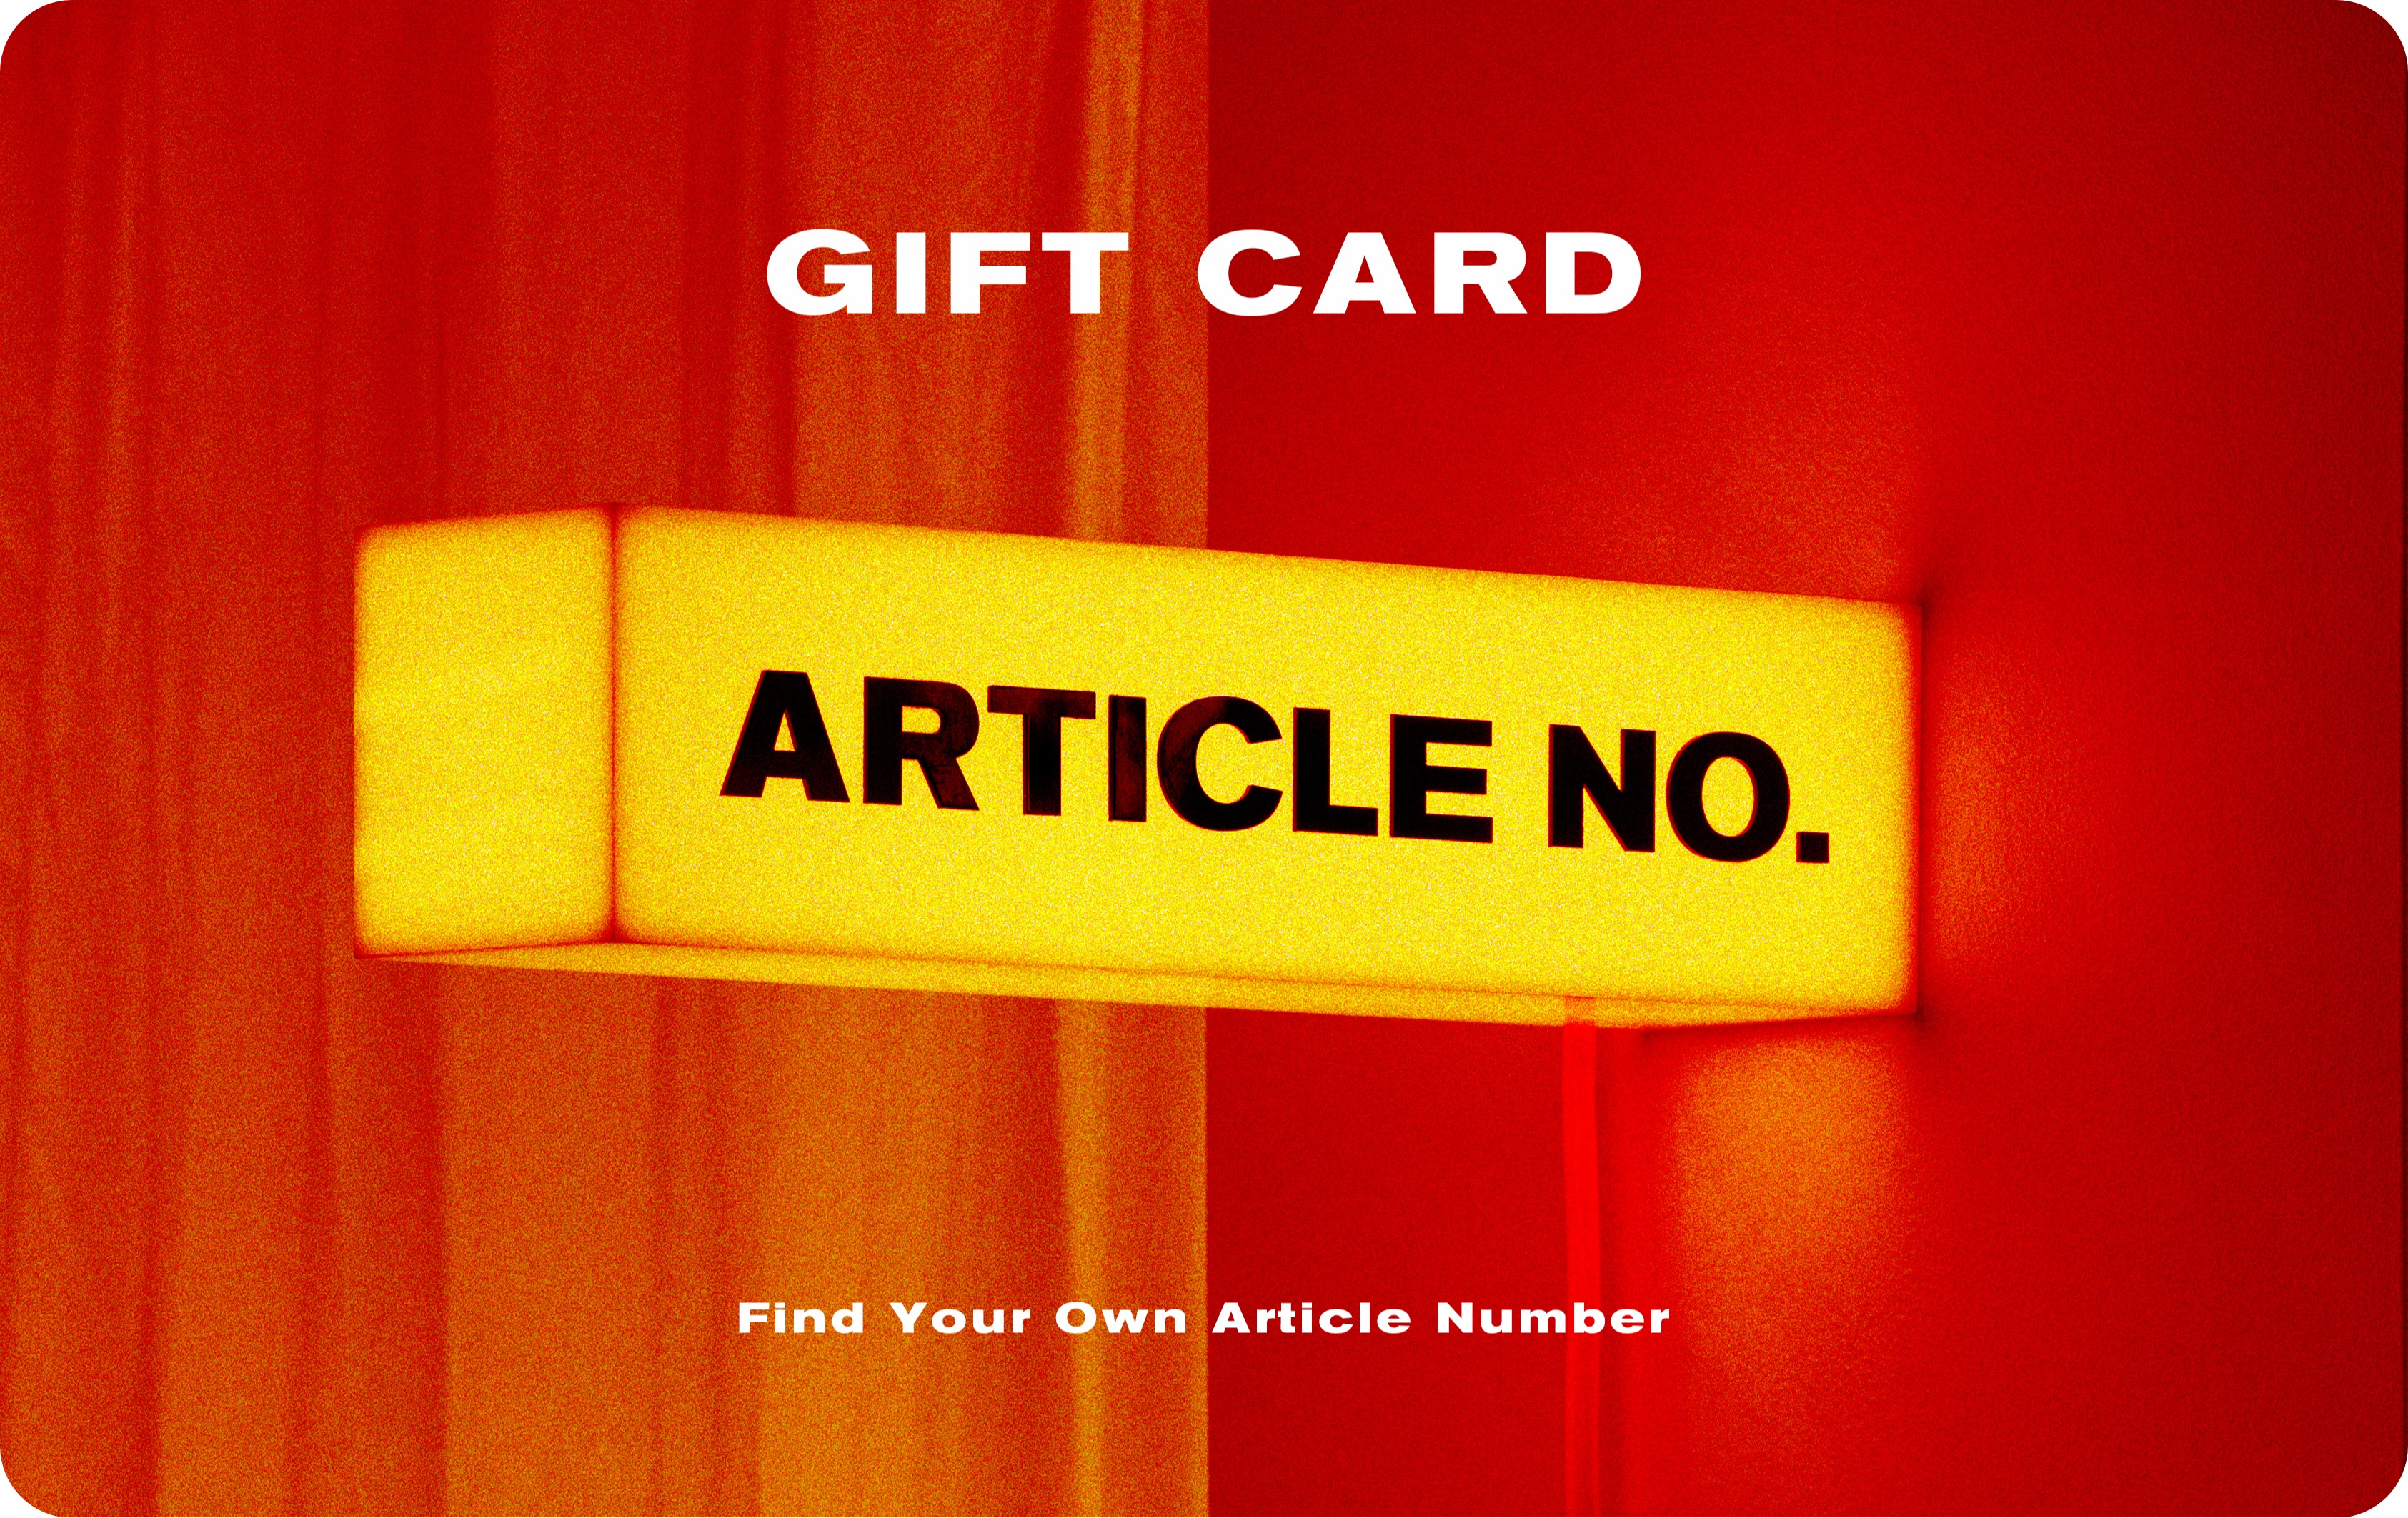 ARTICLE NO. GIFT CARD